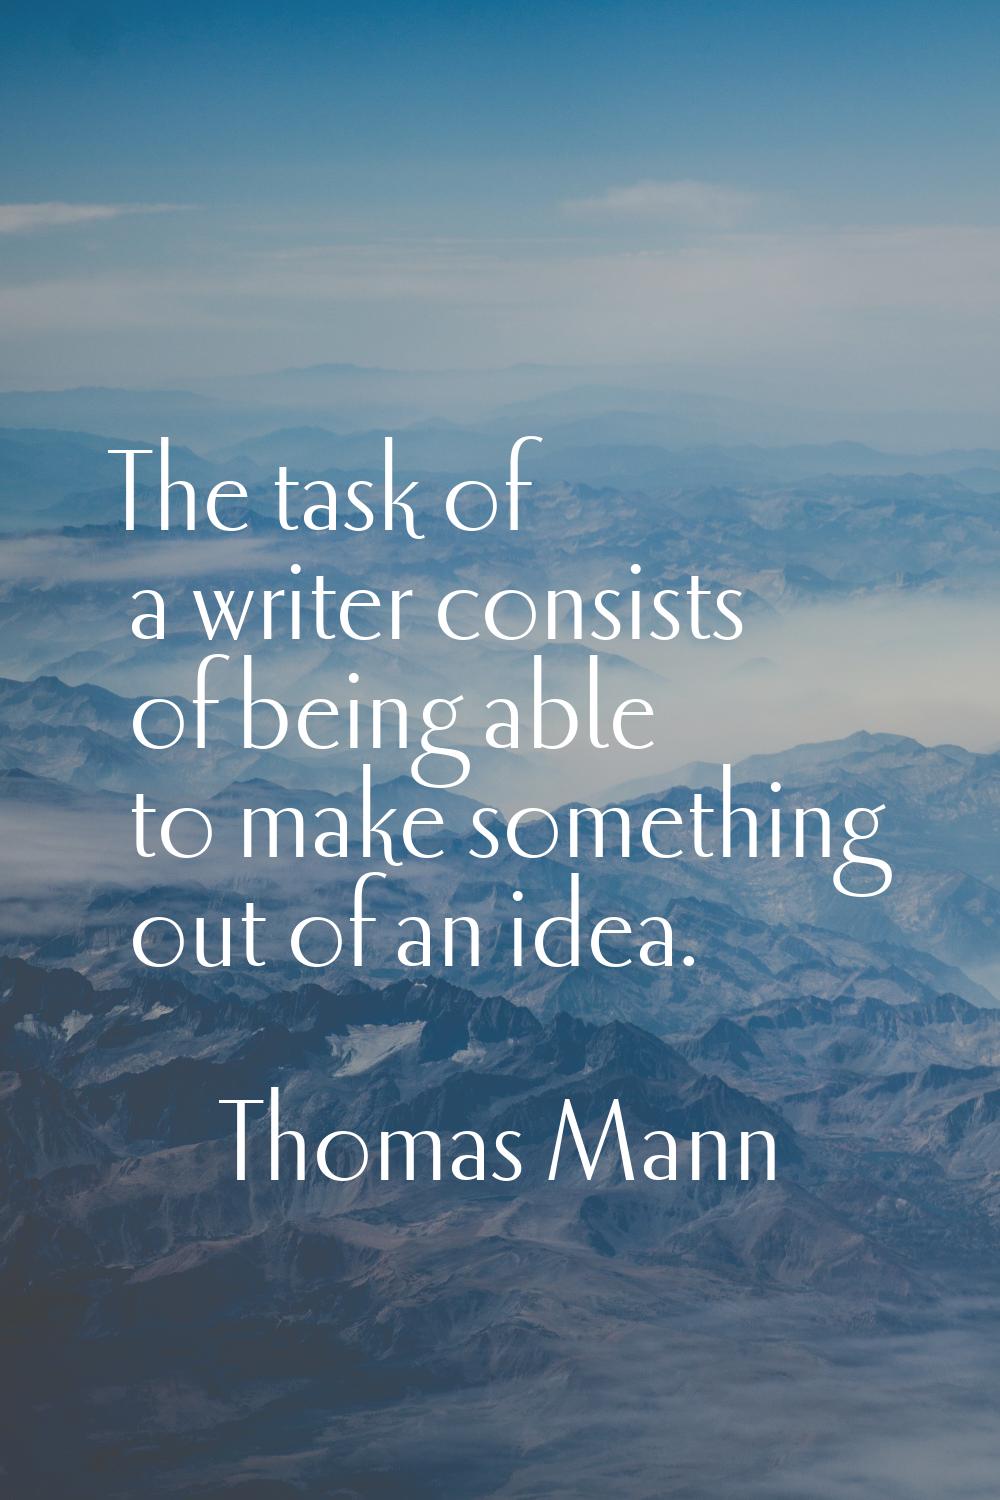 The task of a writer consists of being able to make something out of an idea.